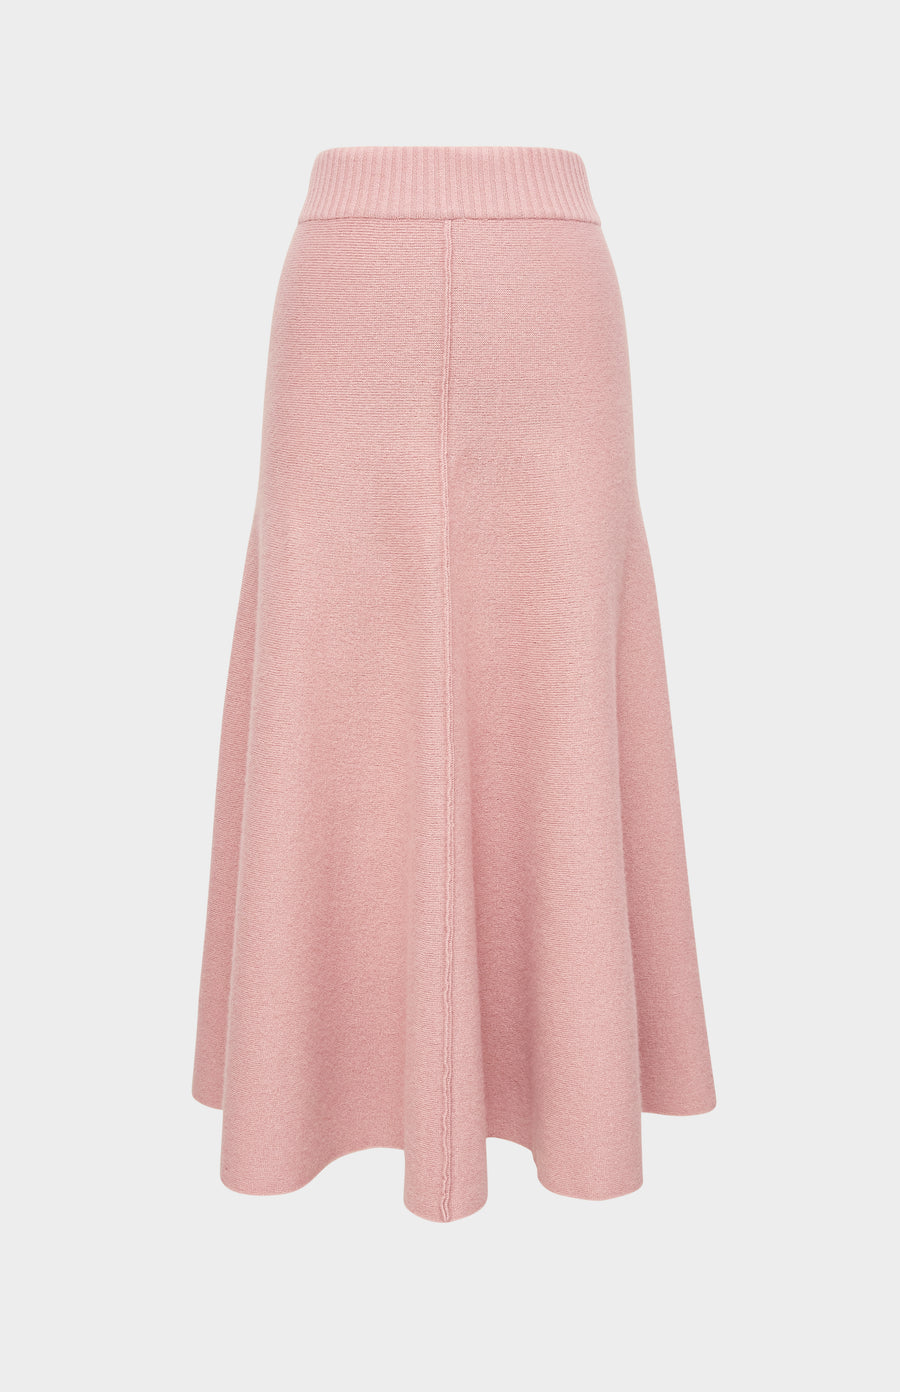 Pringle of Scotland Women's Cashmere Blend Midi Skirt In Dusty Pink